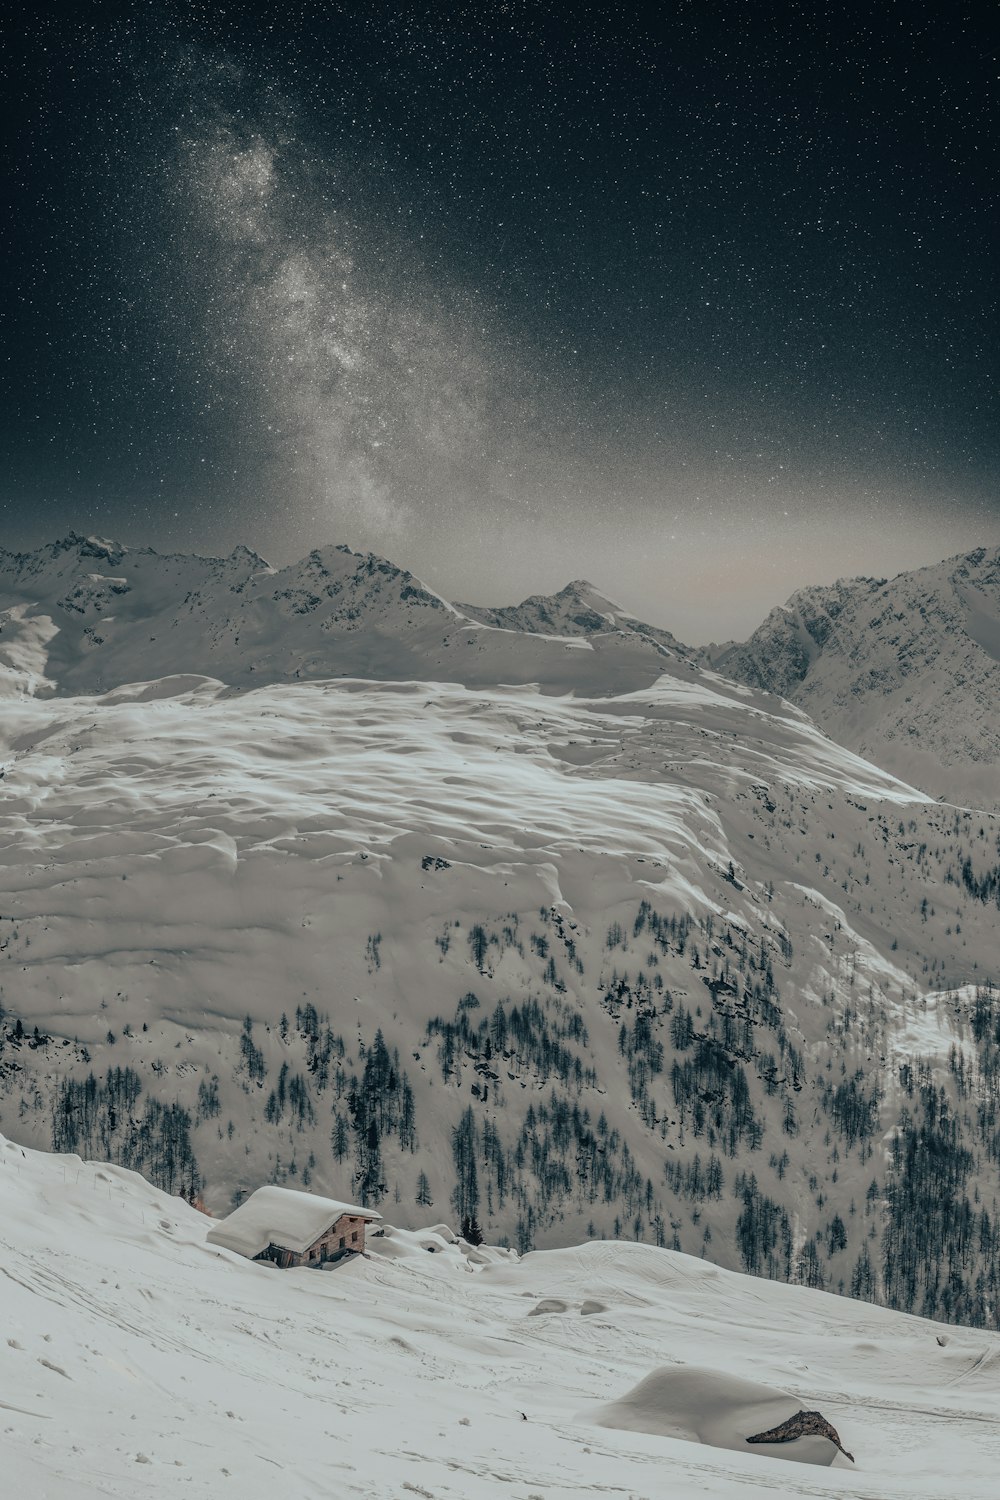 a person standing on a snow covered slope under a night sky